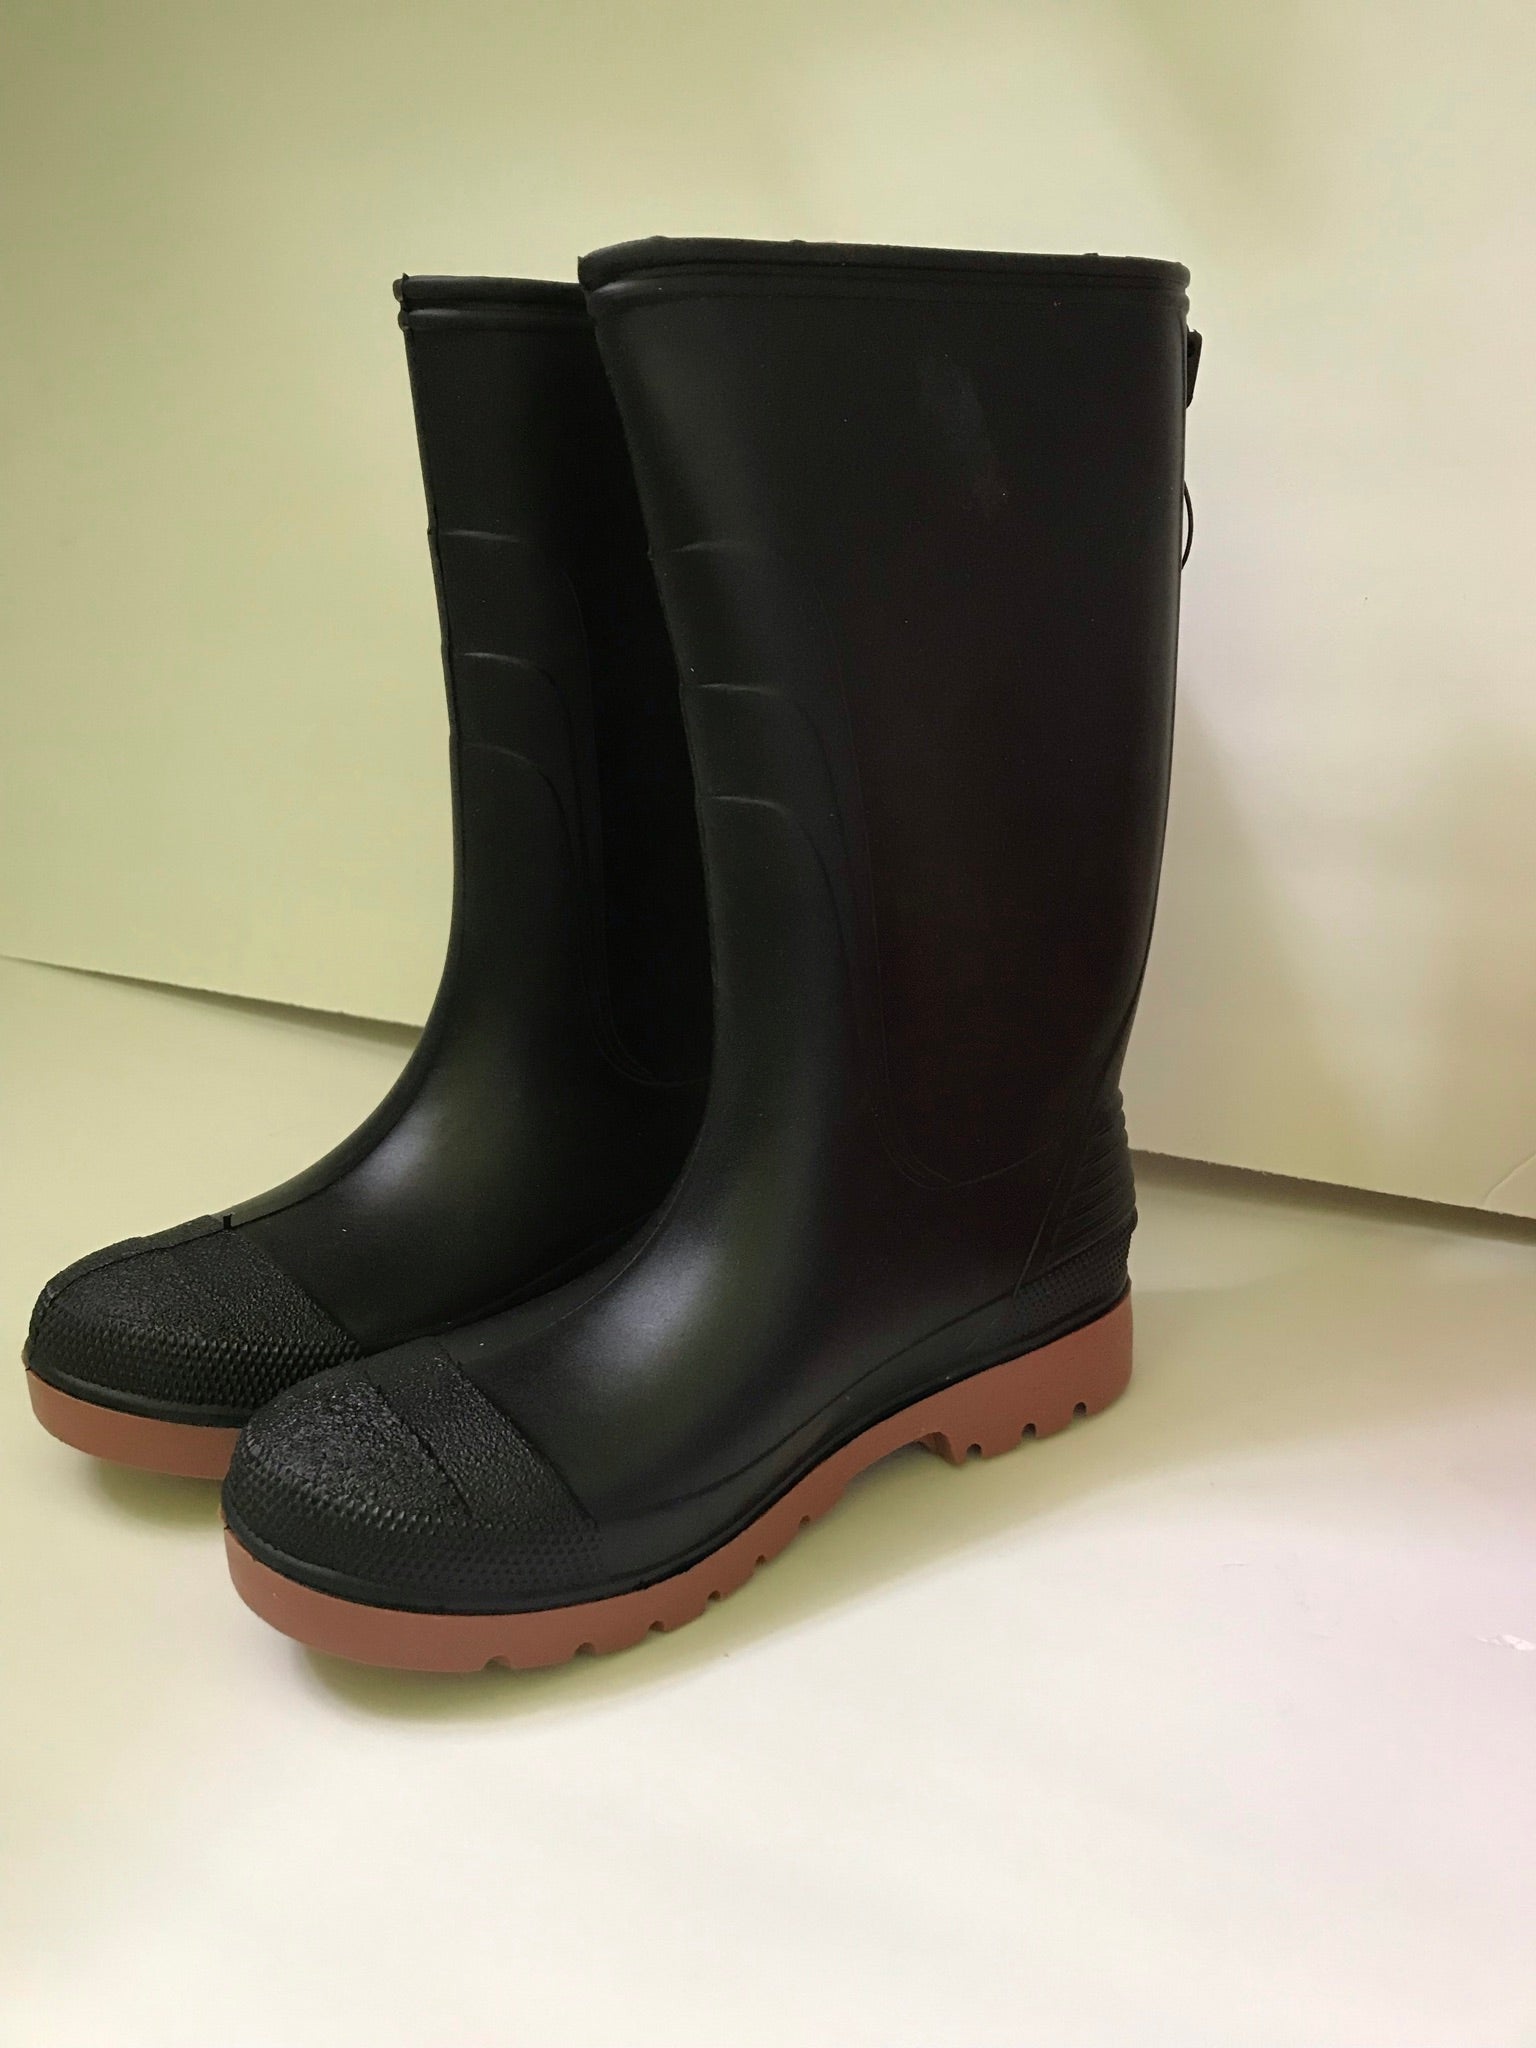 All Purpose Rubber Boots - Youth